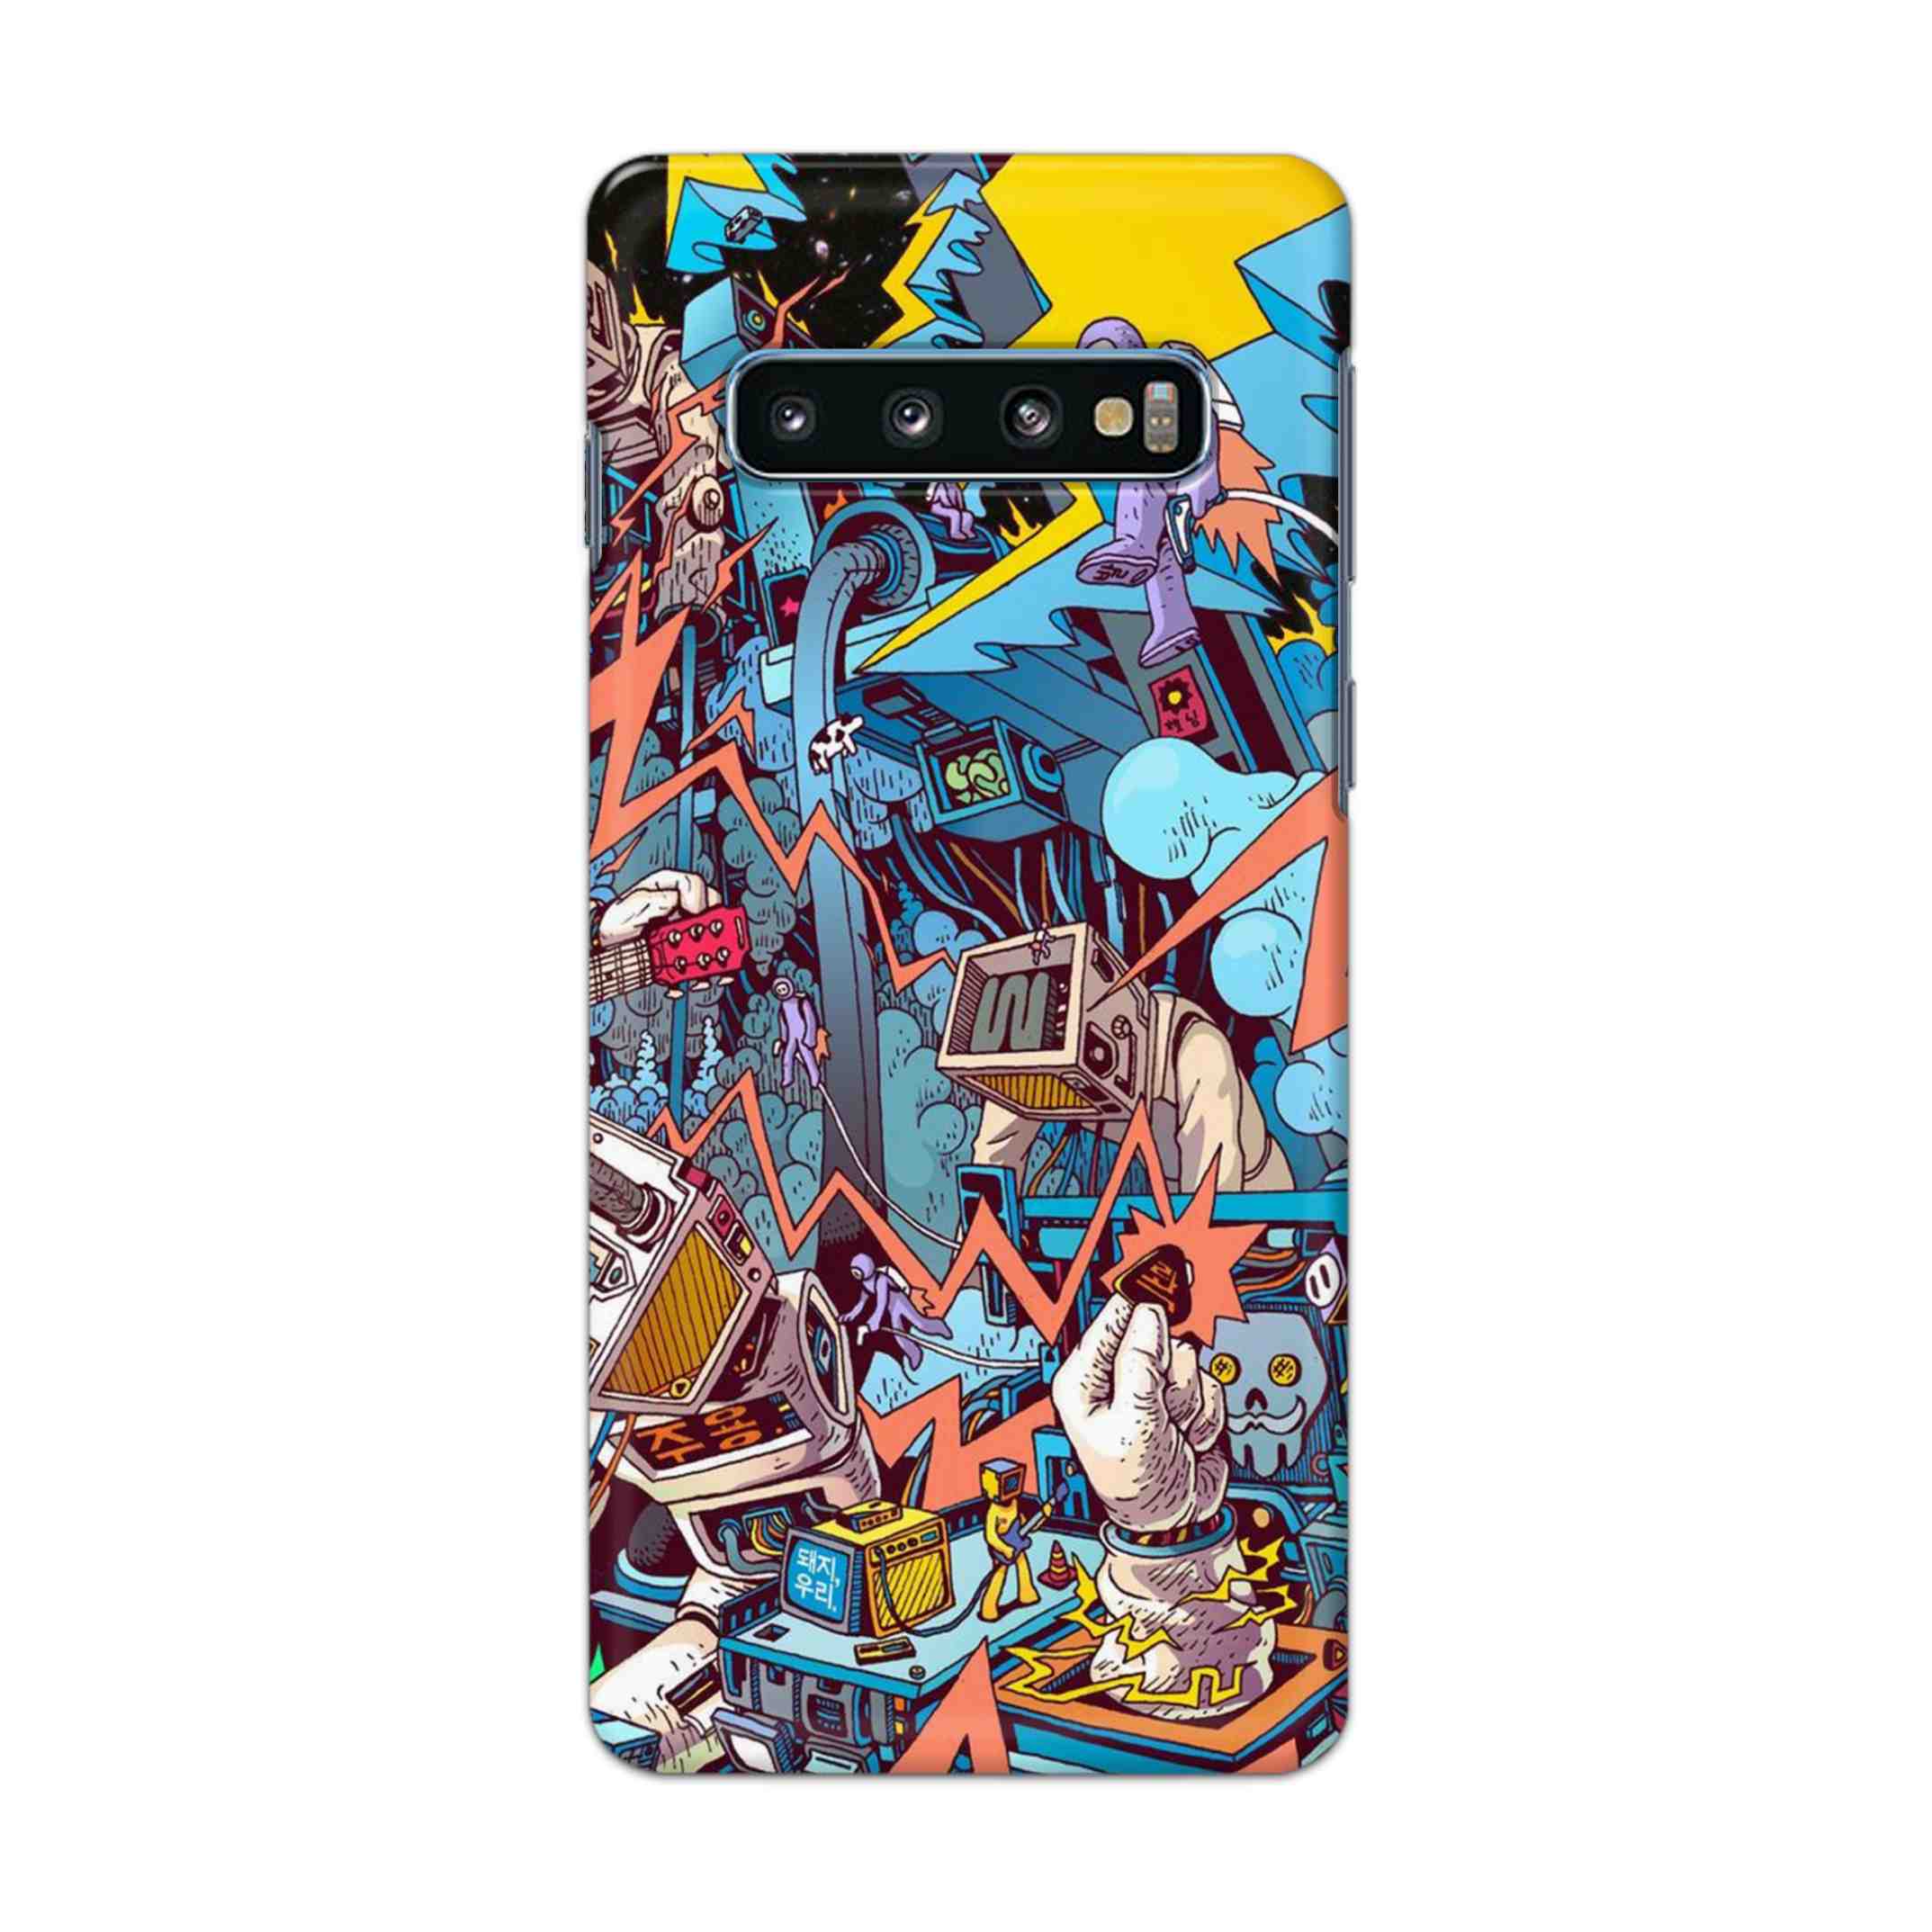 Buy Ofo Panic Hard Back Mobile Phone Case Cover For Samsung Galaxy S10 Plus Online